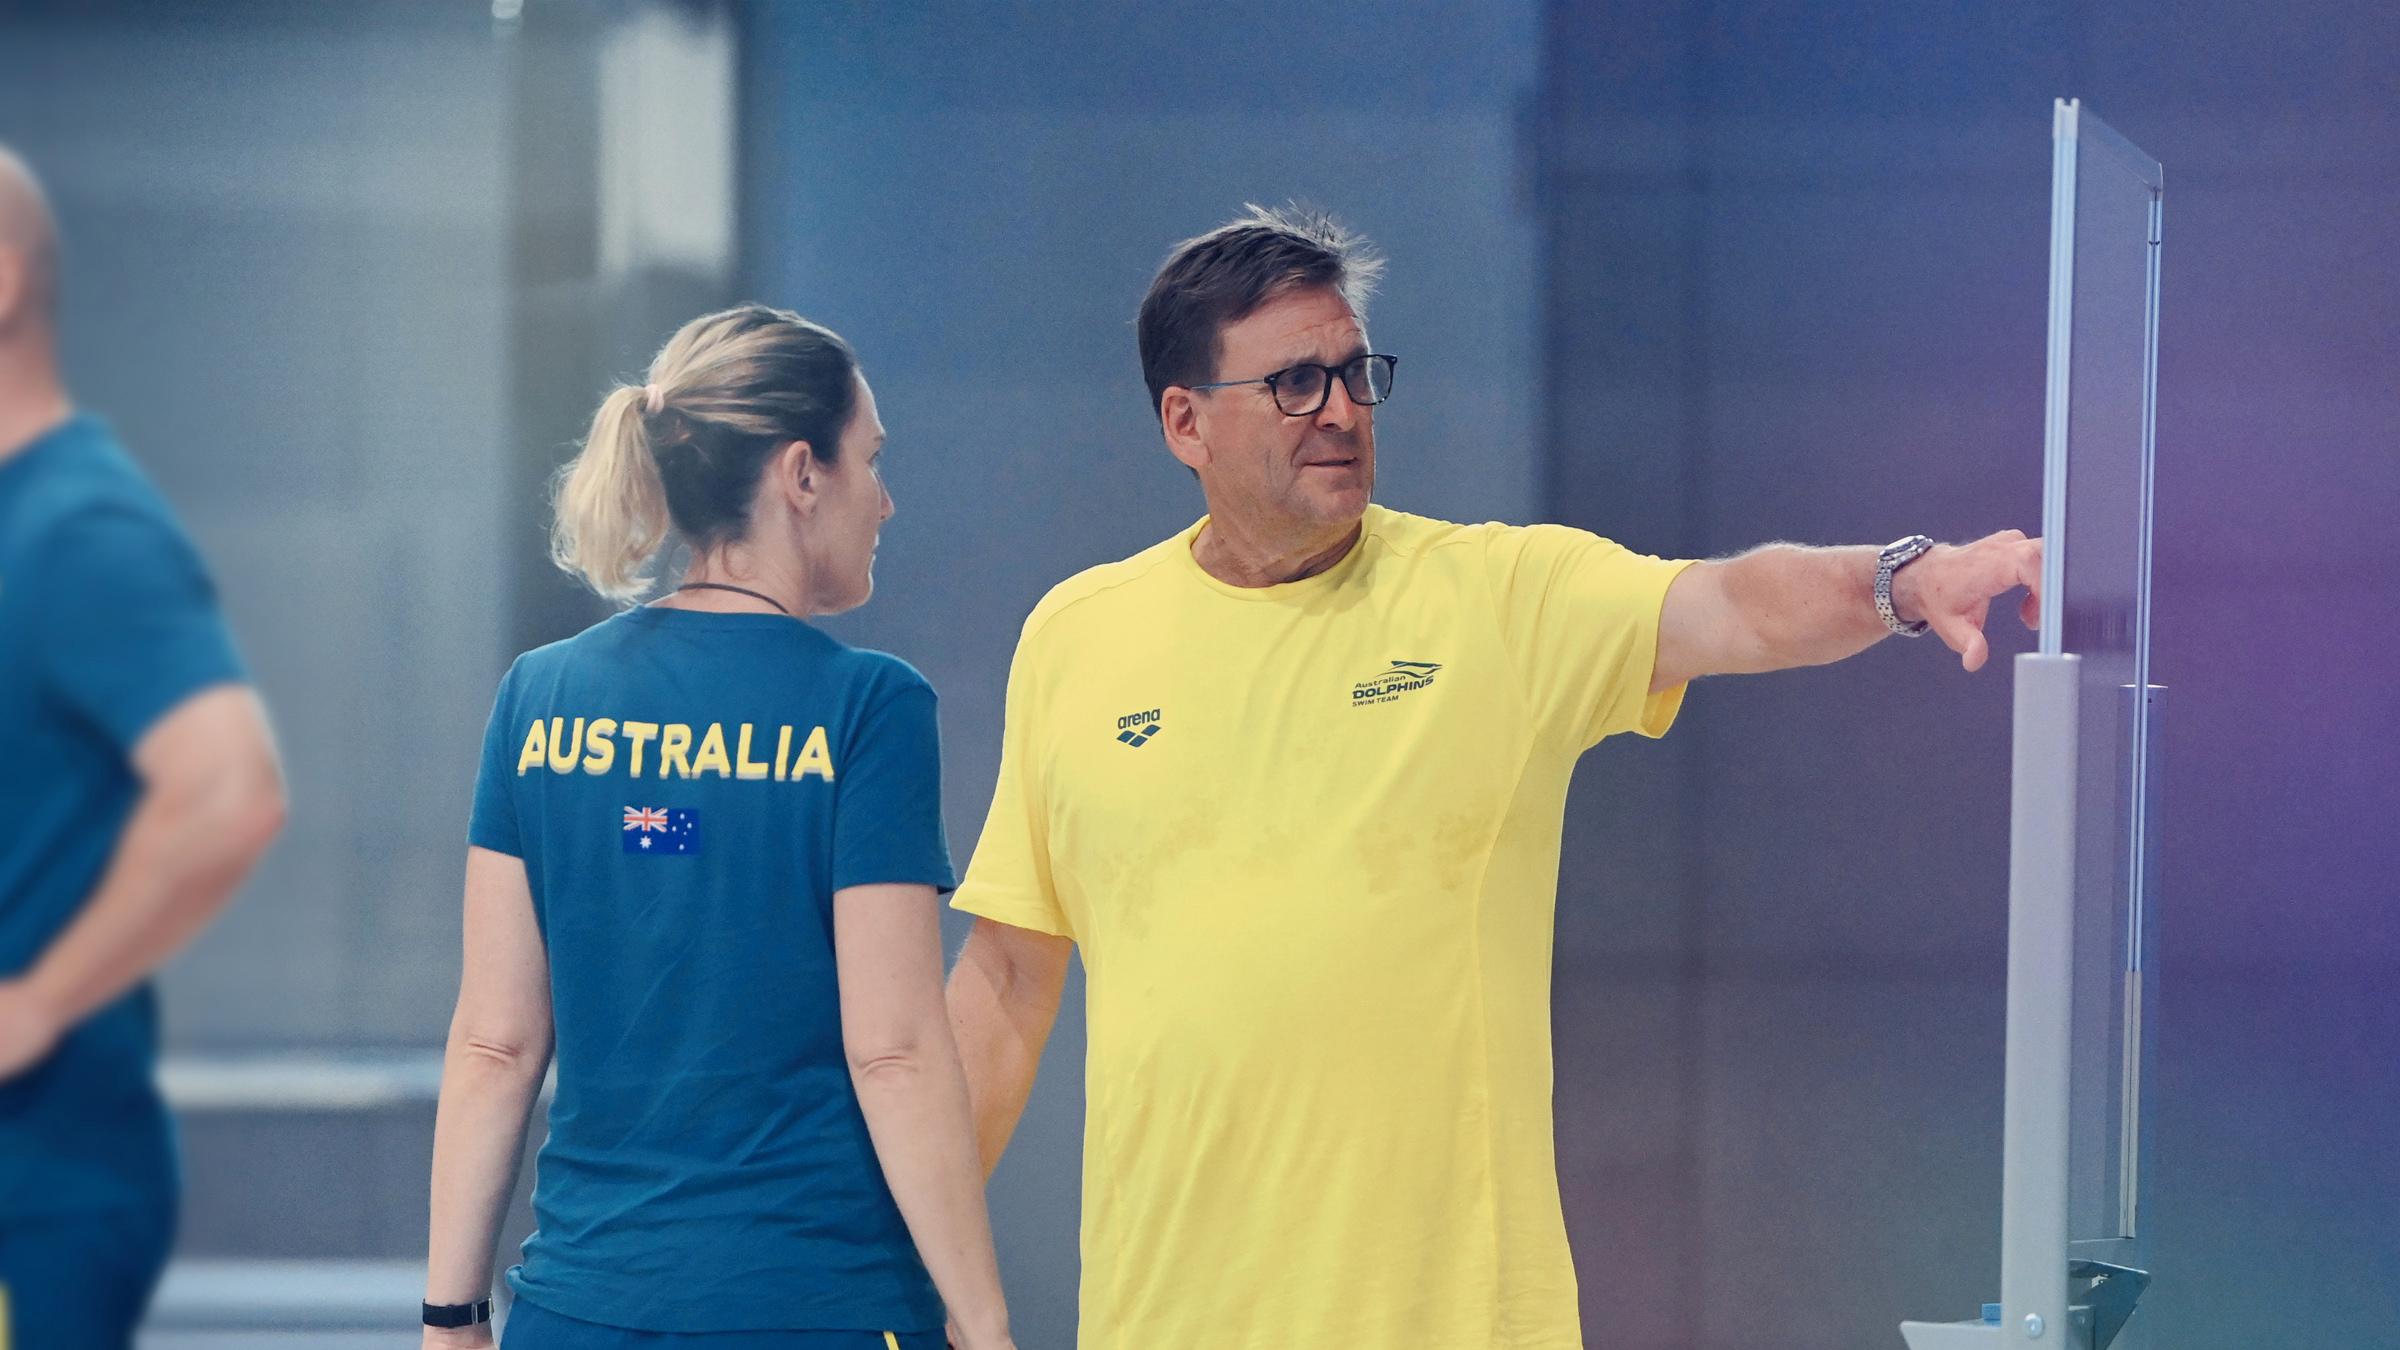 Michael Bohl is wearing a yellow t-shirt and green shorts. He is in the centre of the image pointing to a whiteboard on the right. Coach Amanda Issac (left) is listening to the planned session from Michael